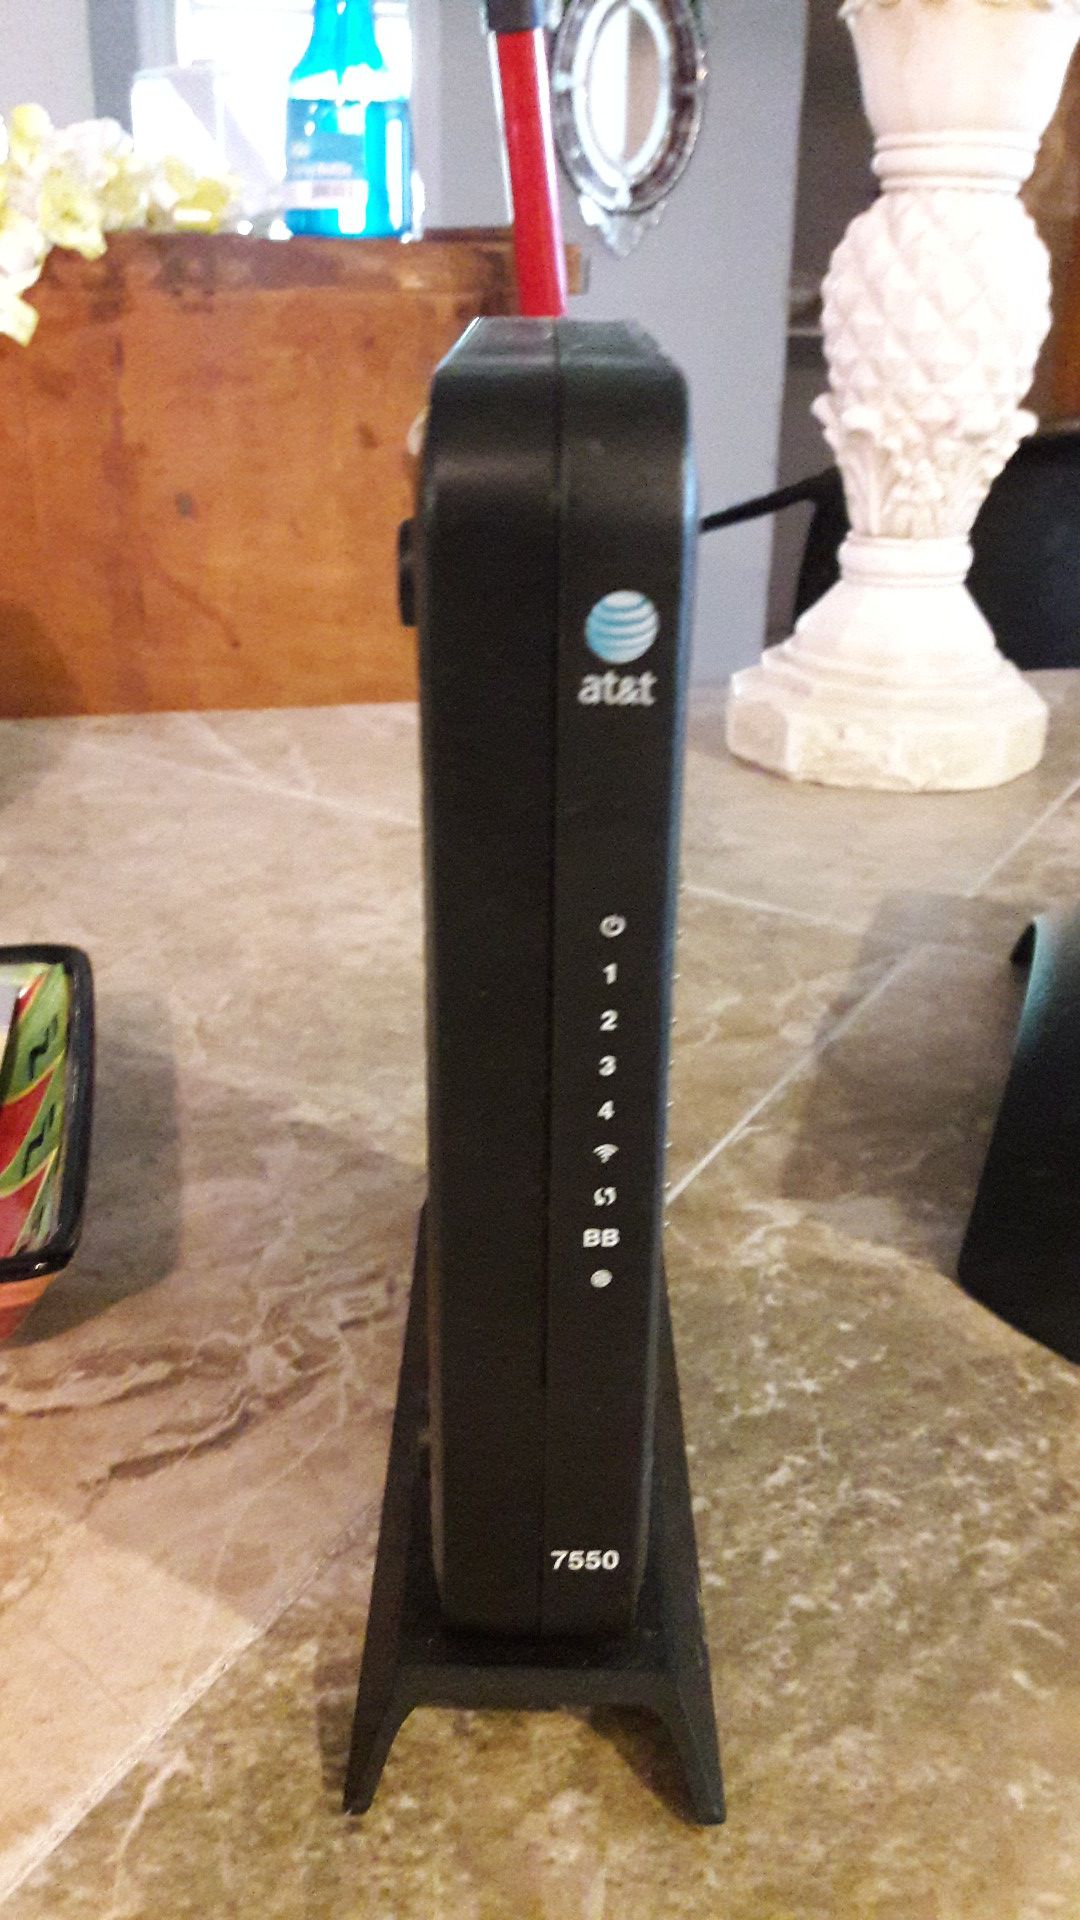 AT&T 7550 Dsl Router